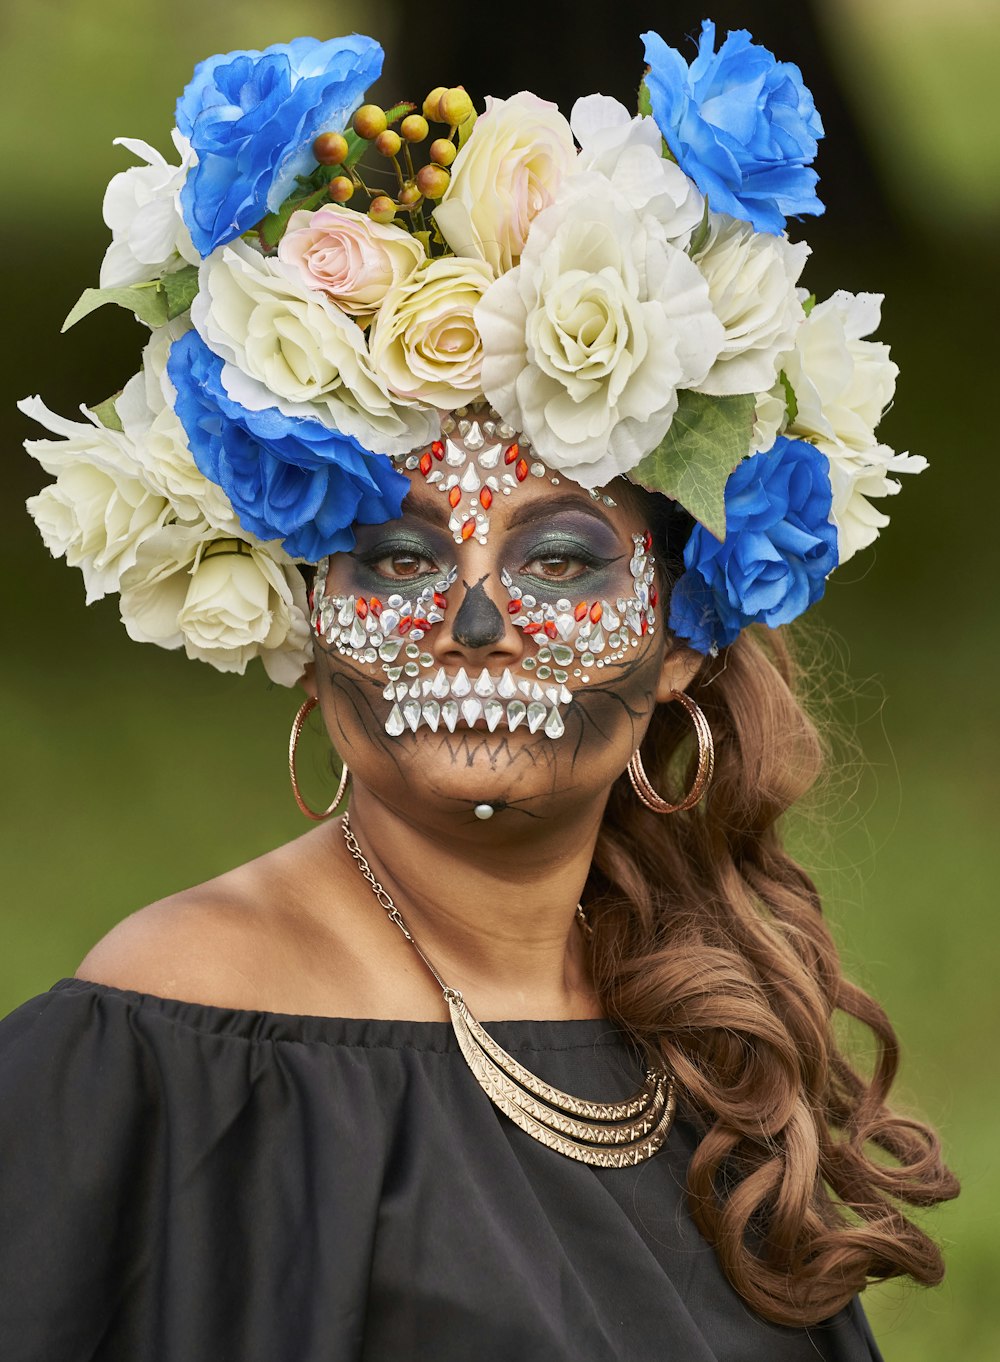 a woman with makeup and flowers in her hair